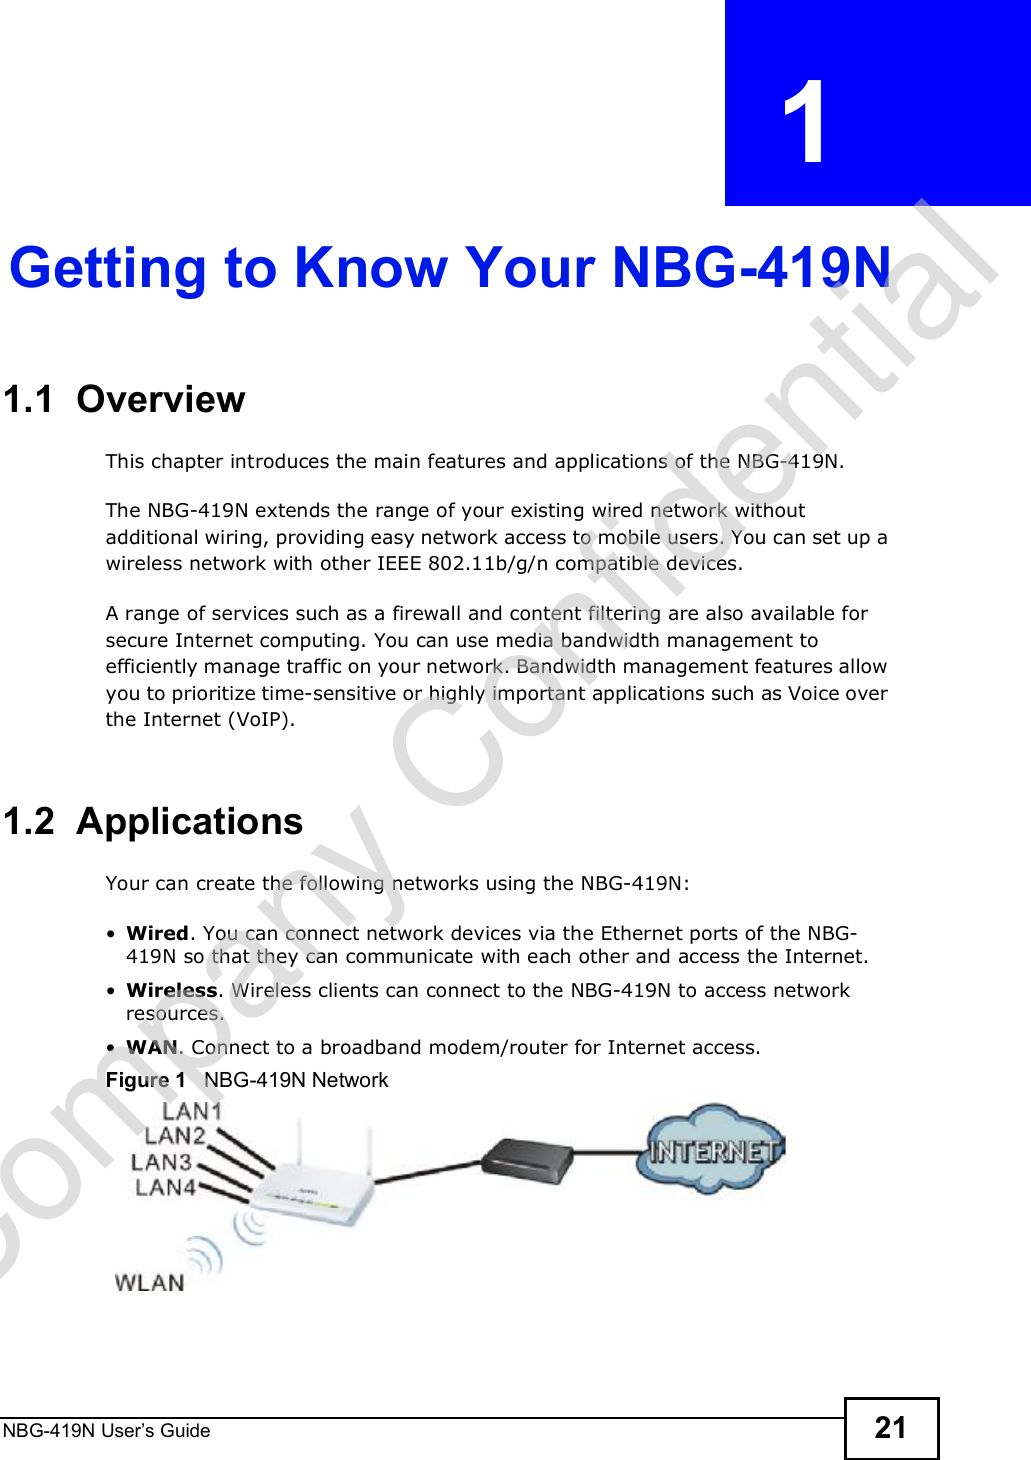 NBG-419N User s Guide 21CHAPTER  1 Getting to Know Your NBG-419N1.1  OverviewThis chapter introduces the main features and applications of the NBG-419N.The NBG-419N extends the range of your existing wired network without additional wiring, providing easy network access to mobile users. You can set up a wireless network with other IEEE 802.11b/g/n compatible devices.A range of services such as a firewall and content filtering are also available for secure Internet computing. You can use media bandwidth management to efficiently manage traffic on your network. Bandwidth management features allow you to prioritize time-sensitive or highly important applications such as Voice over the Internet (VoIP). 1.2  ApplicationsYour can create the following networks using the NBG-419N: Wired. You can connect network devices via the Ethernet ports of the NBG-419N so that they can communicate with each other and access the Internet. Wireless. Wireless clients can connect to the NBG-419N to access network resources. WAN. Connect to a broadband modem/router for Internet access. Figure 1   NBG-419N NetworkCompany Confidential